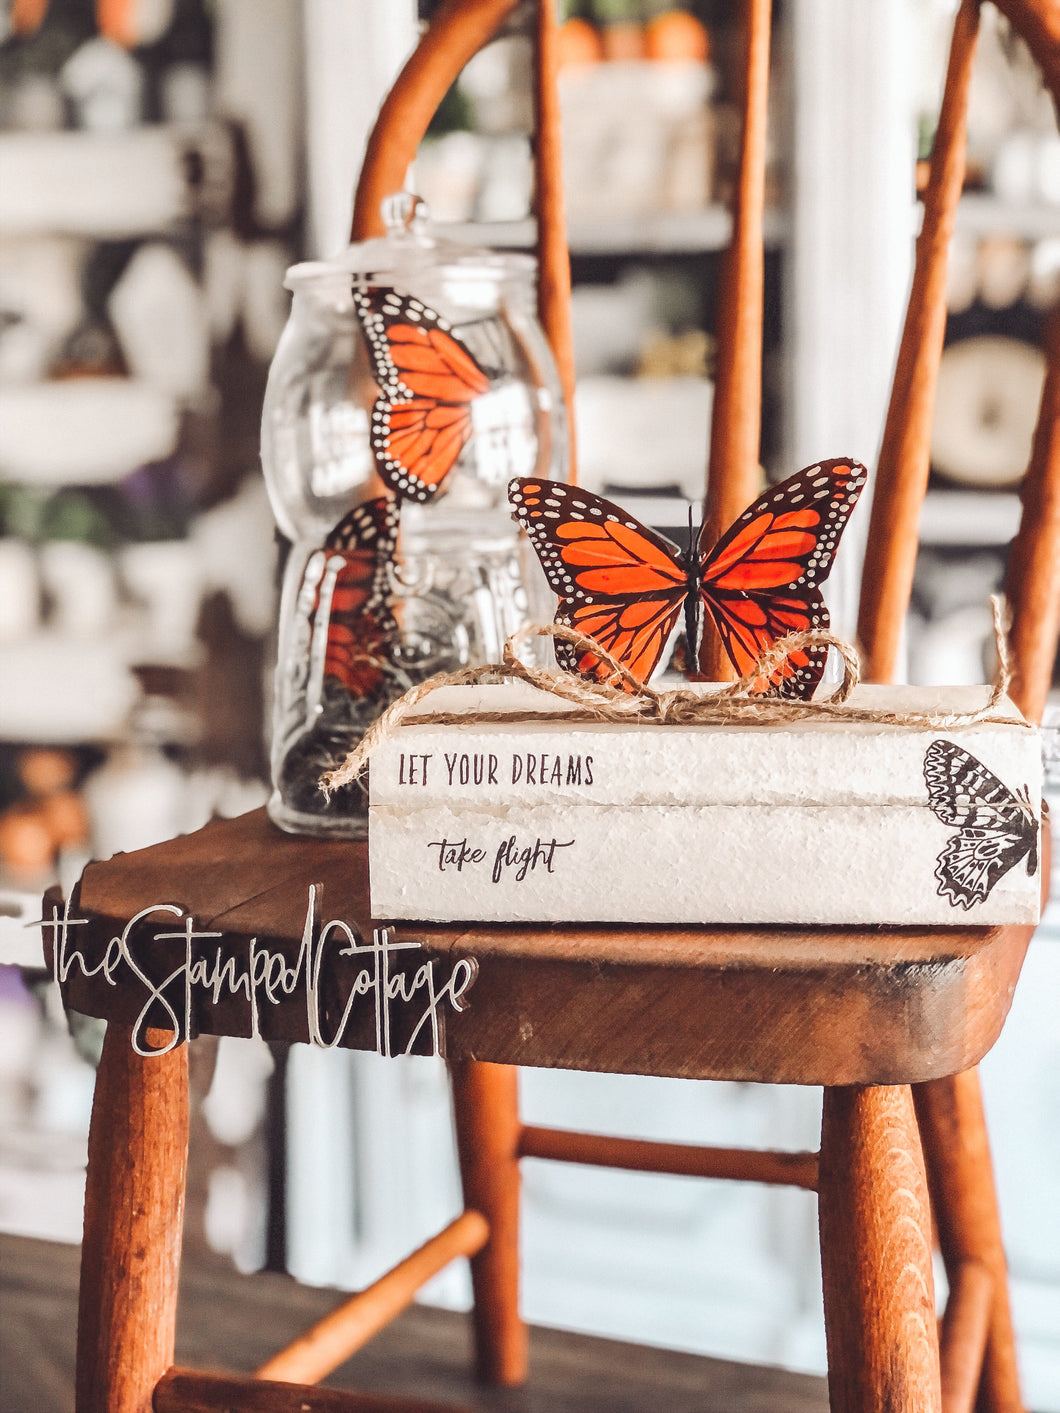 Stamped Book Stack - Let your dreams take flight with a butterfly wing